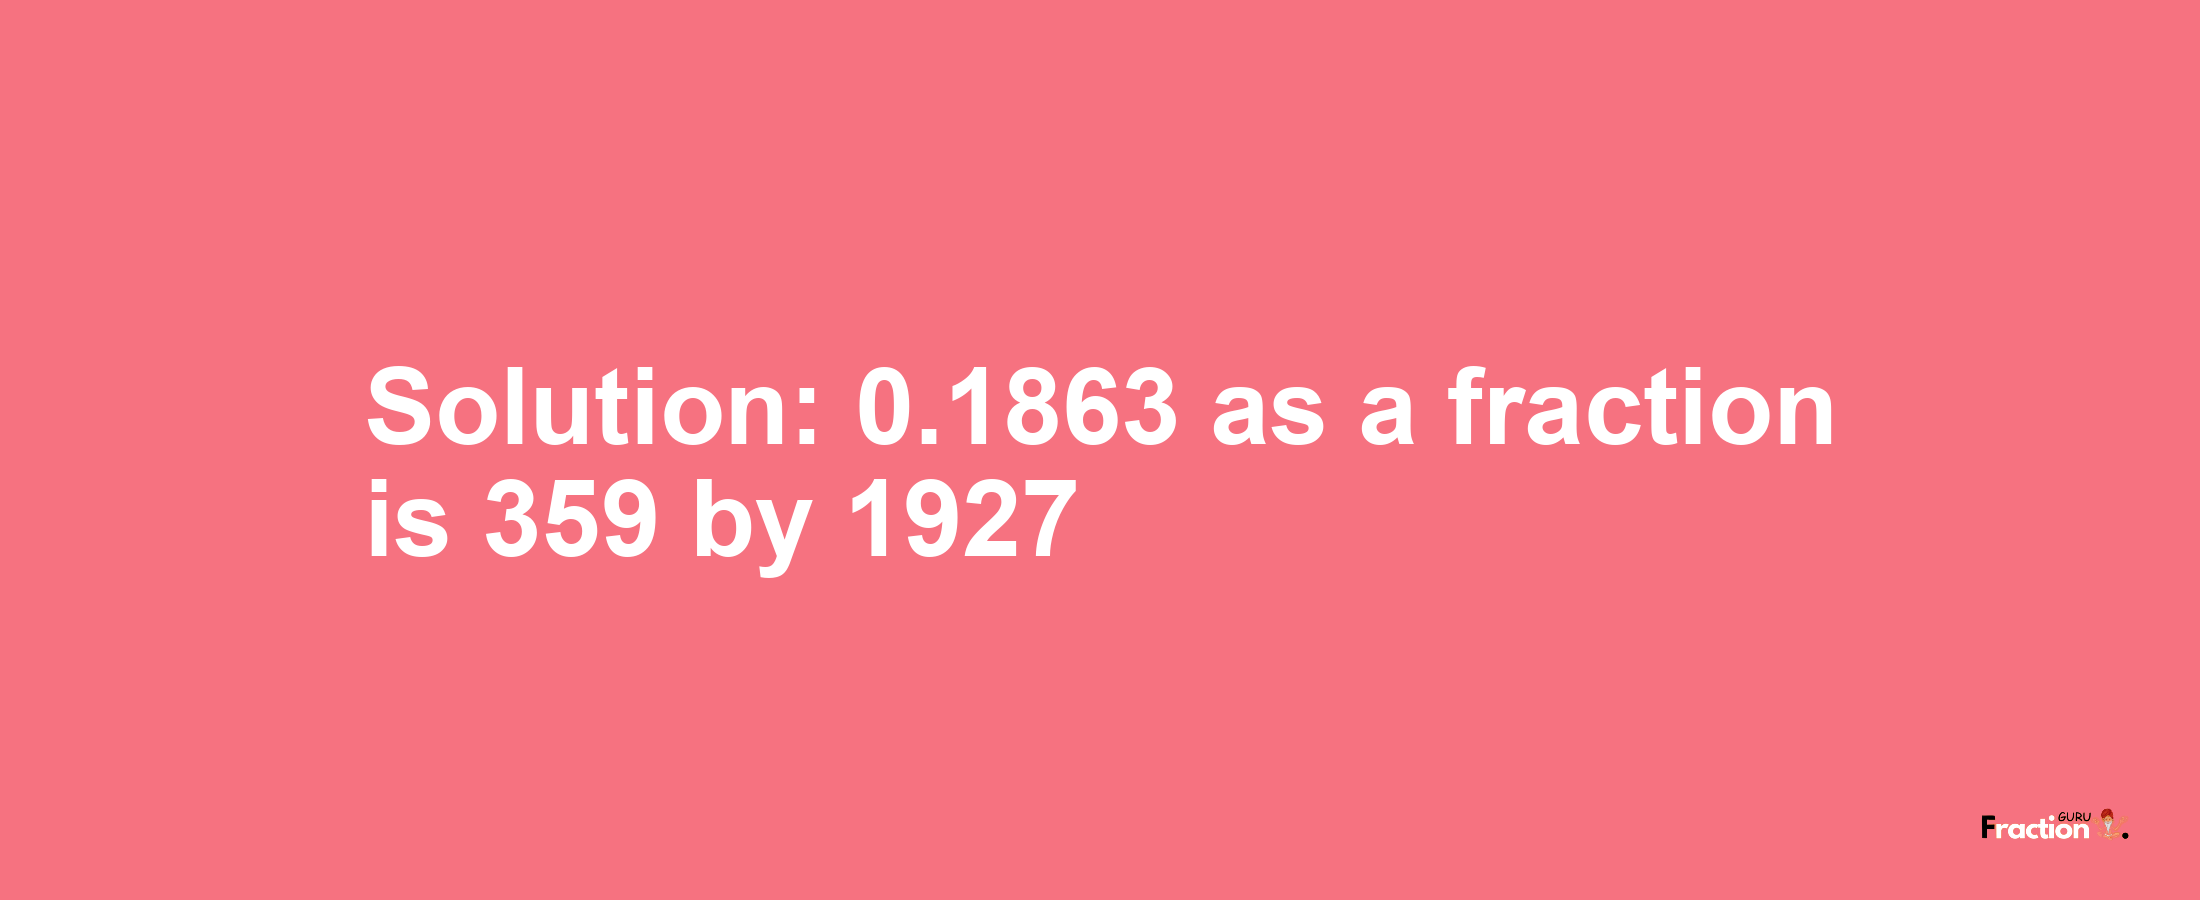 Solution:0.1863 as a fraction is 359/1927